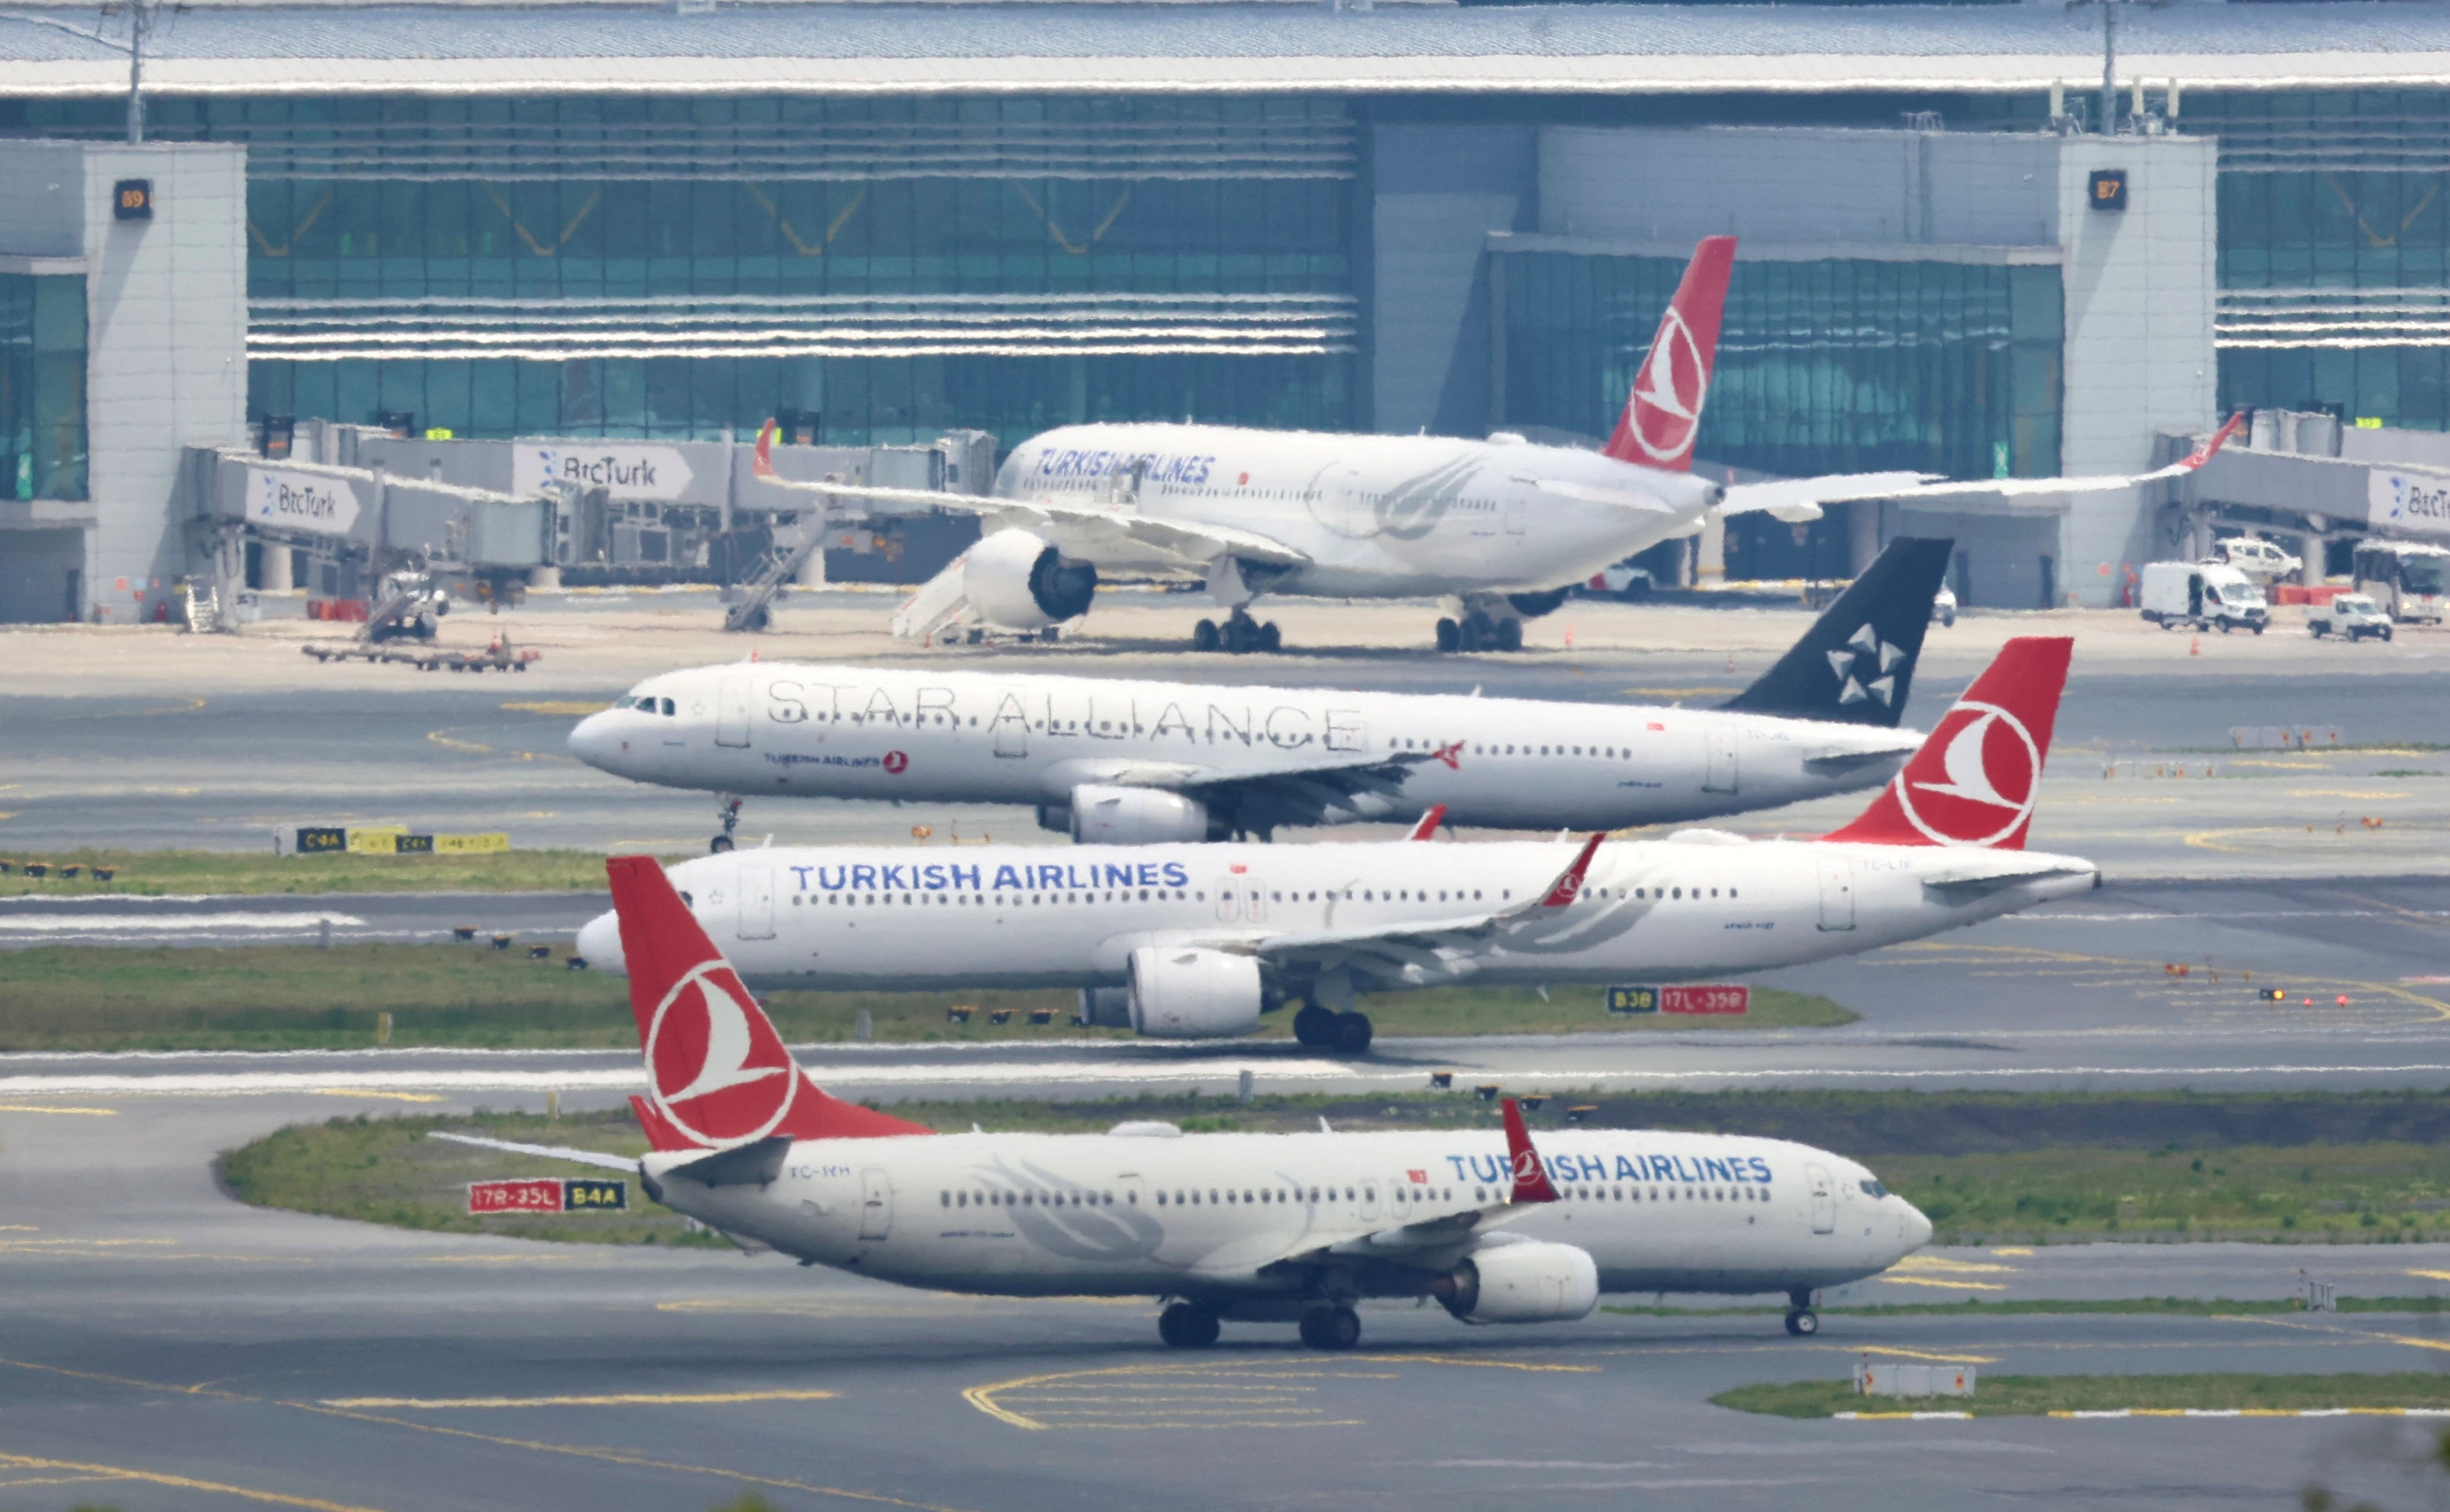 THY aircraft are pictured on the tarmac of IGA in Istanbul